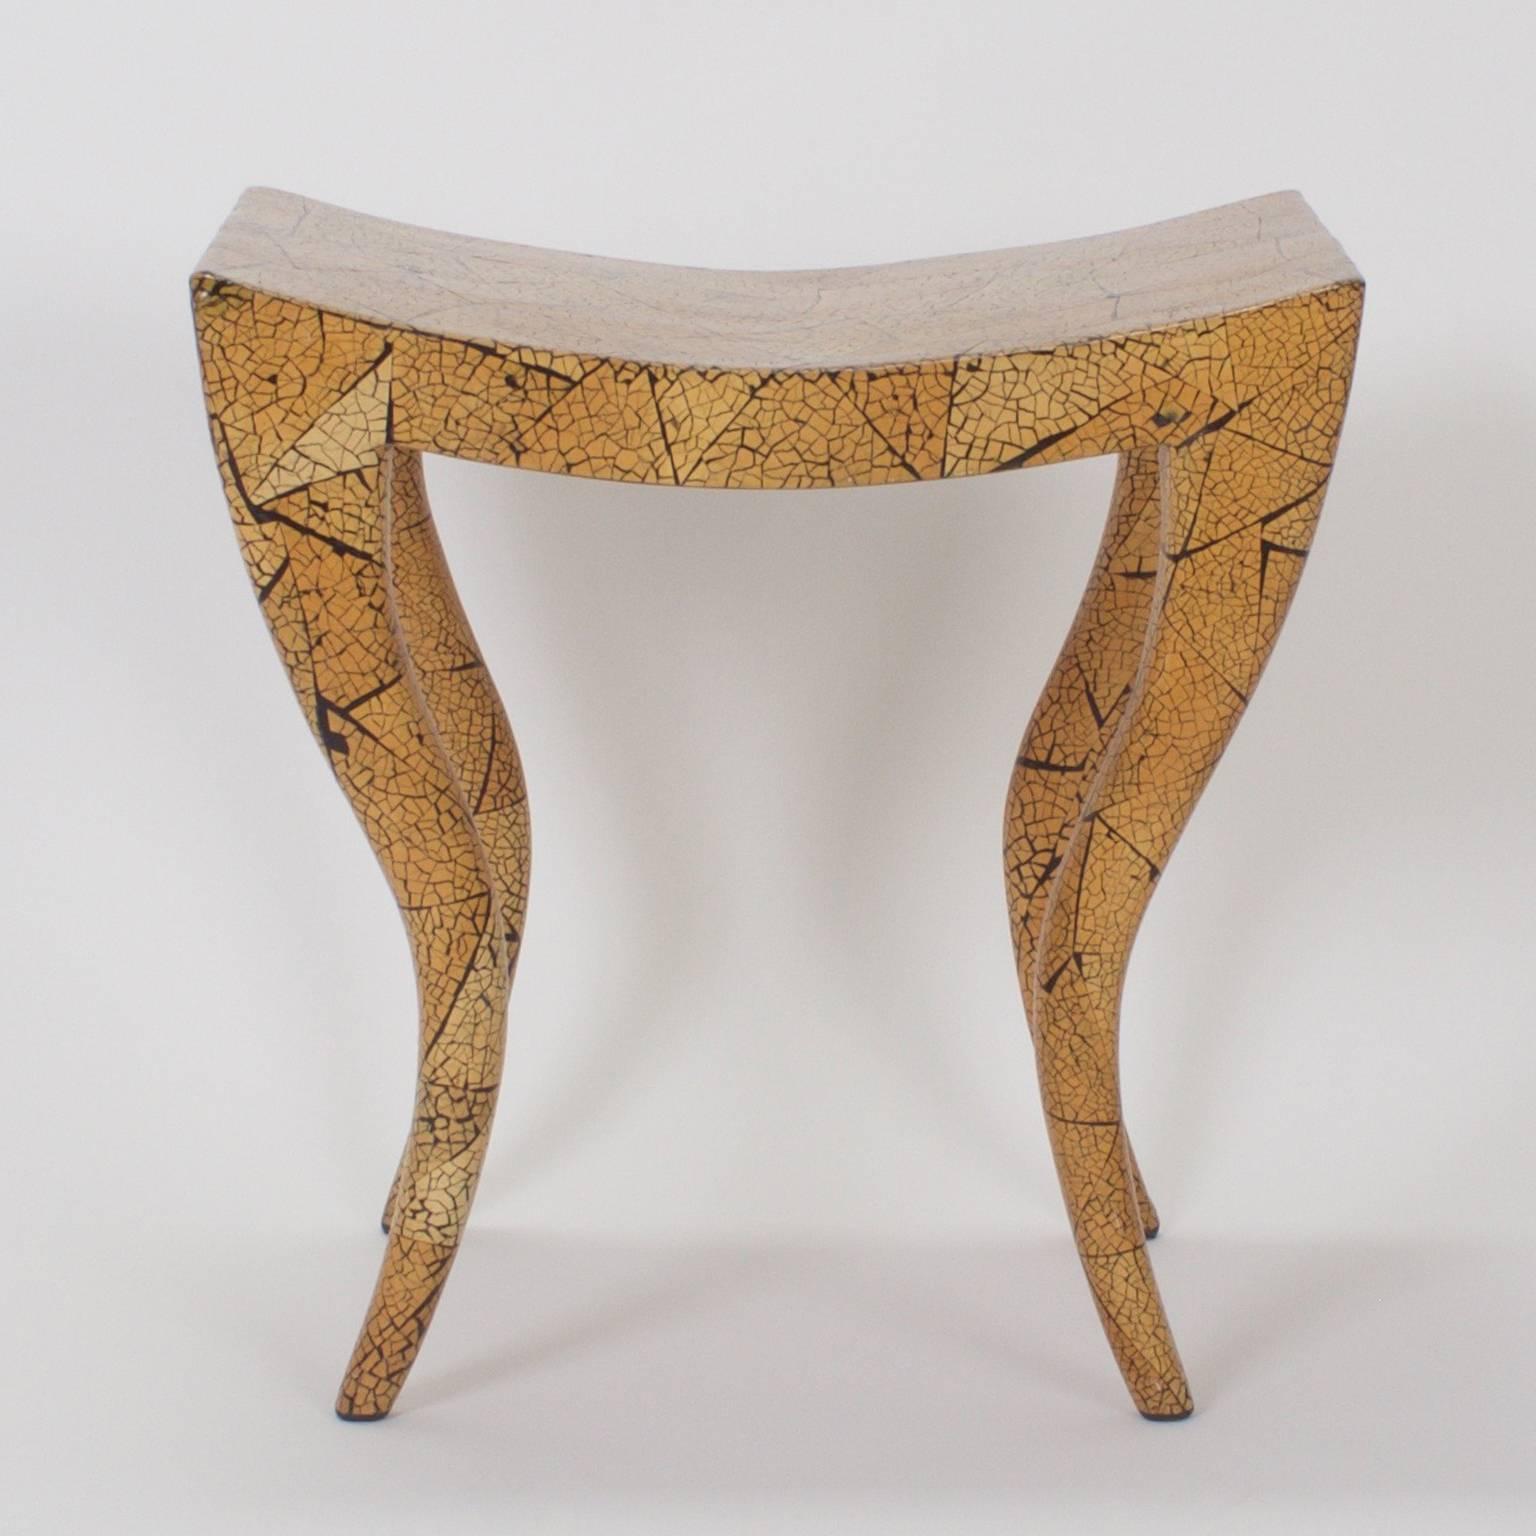 Swank midcentury bench or stool with a dramatic Egyptian influenced form and a hip crackled finish in variegated organic colors. Signed on a proper English brass tag 